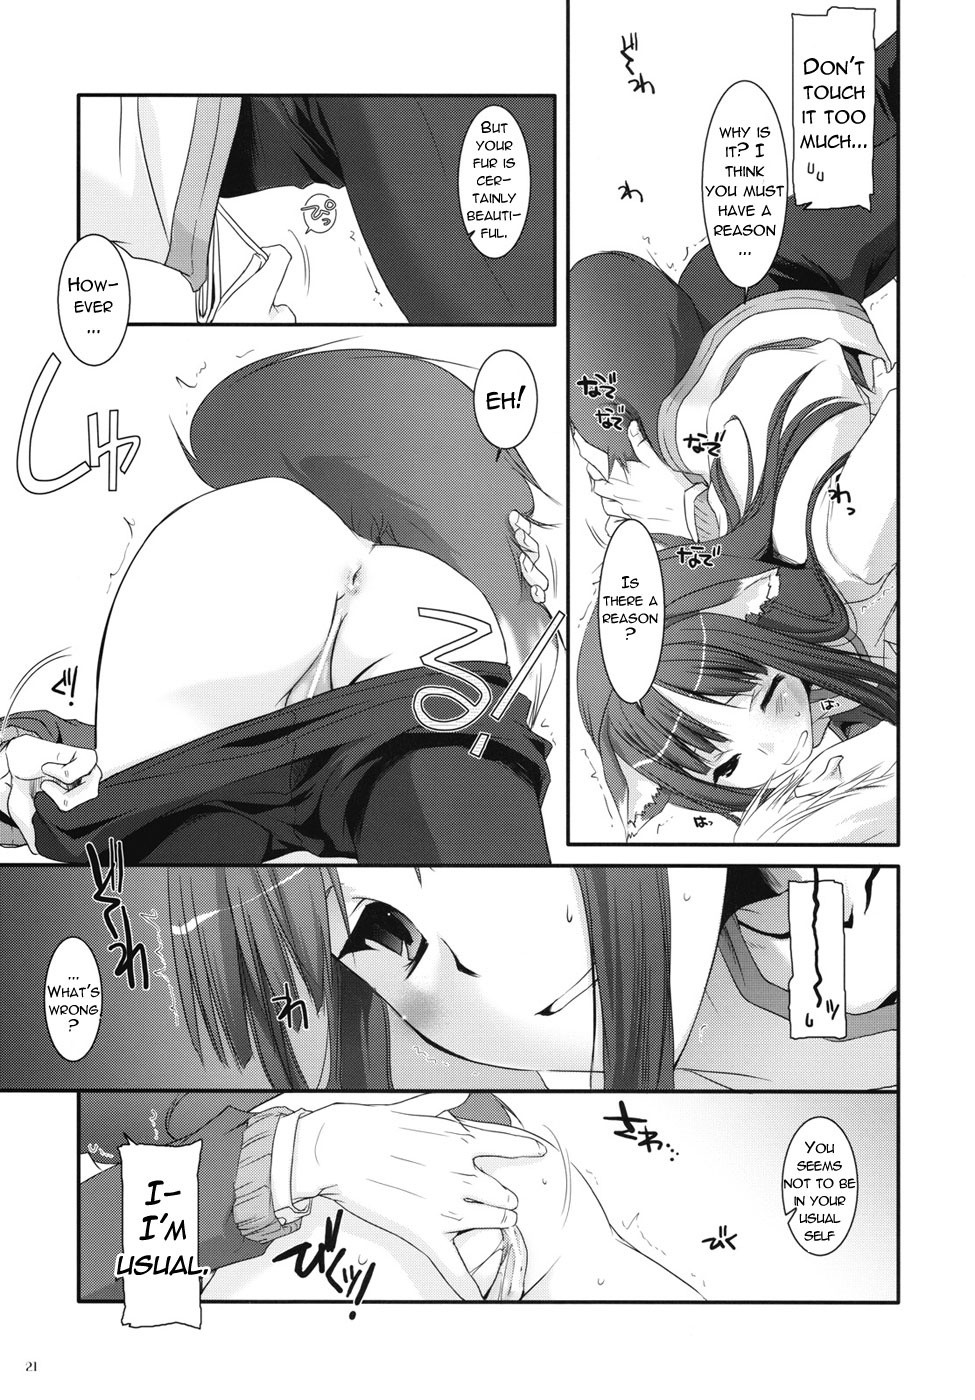 D.L. action 43 hentai manga picture 18